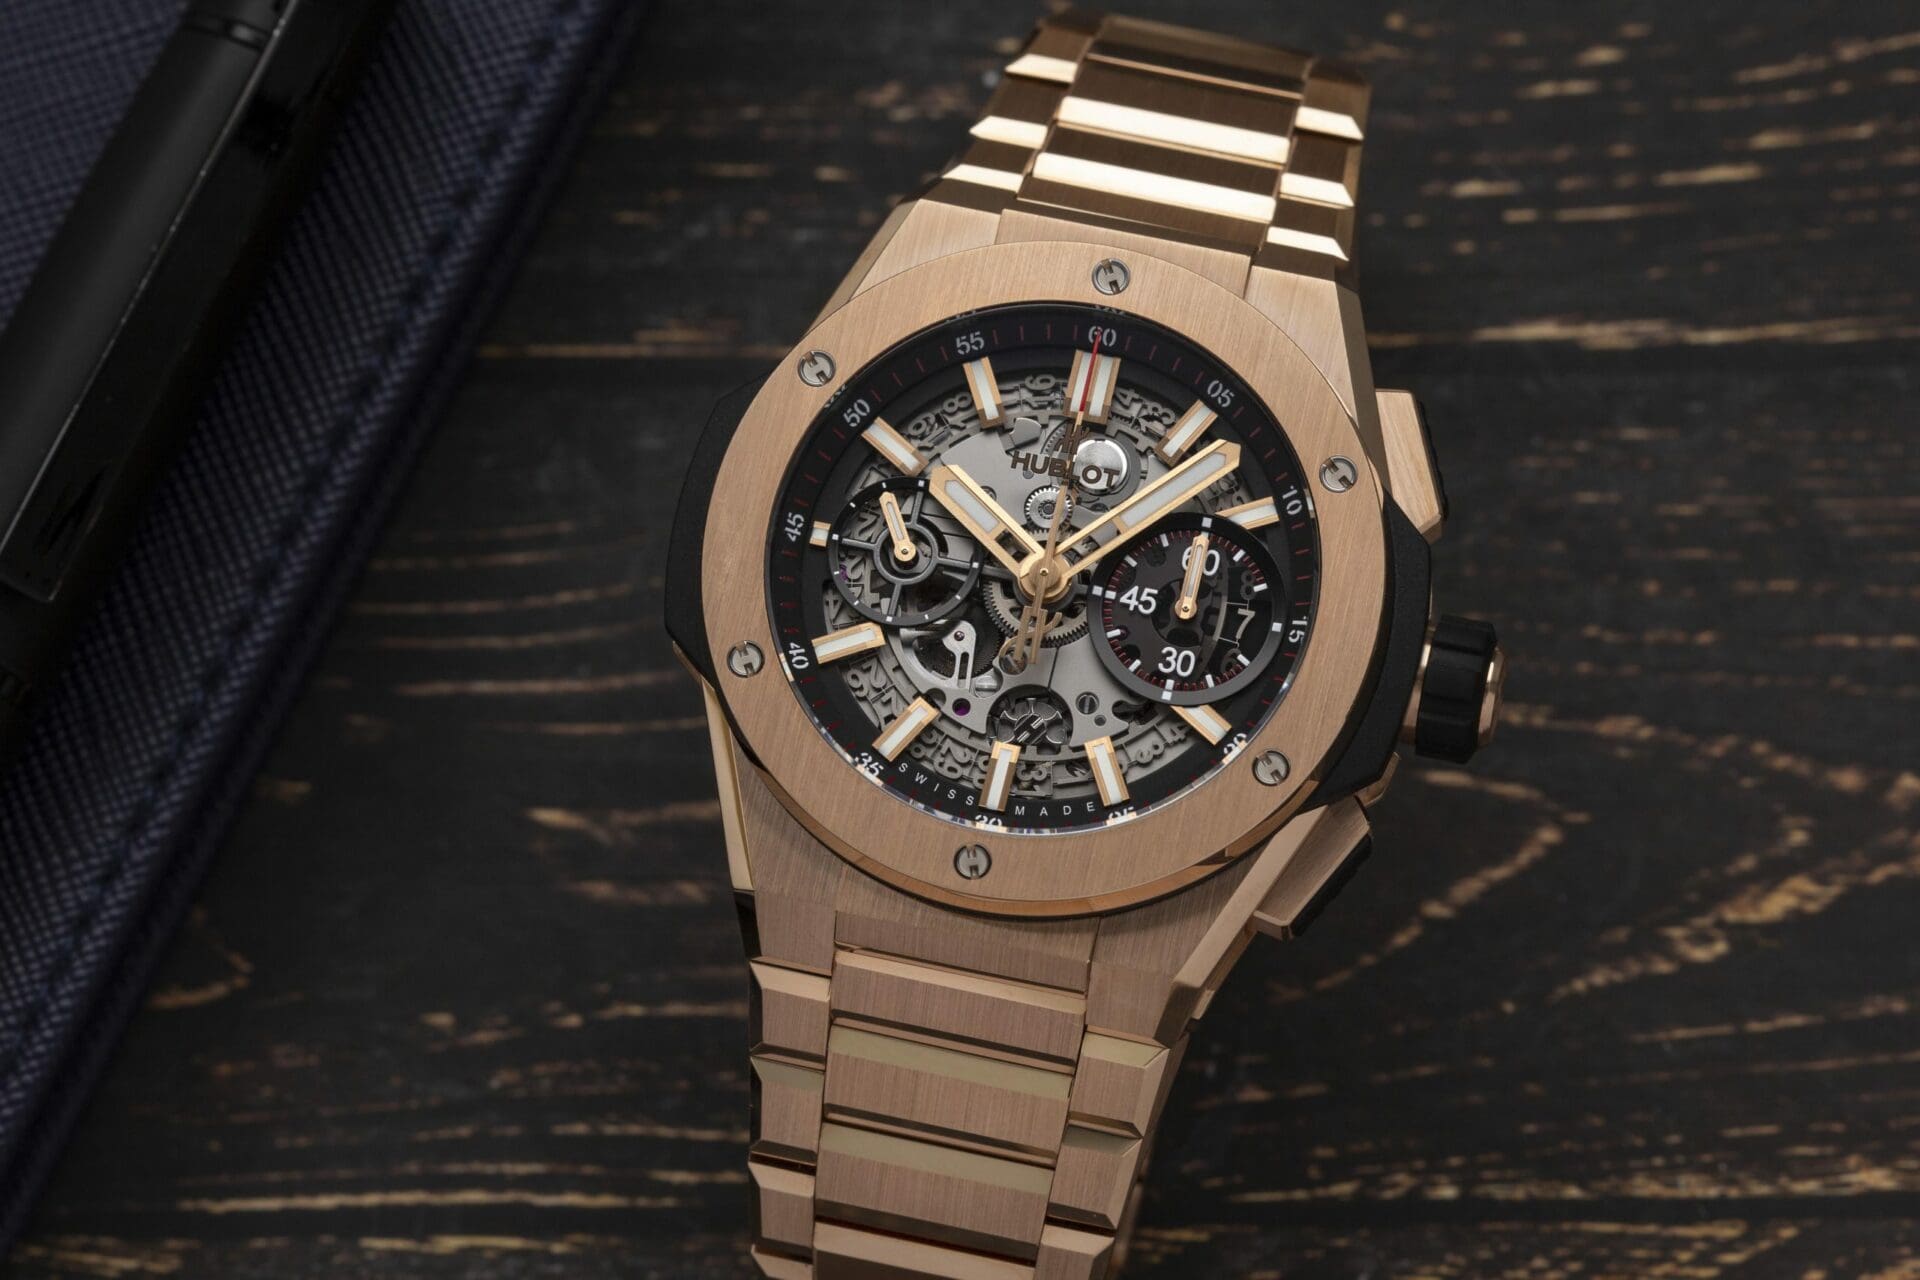 A WEEK ON THE WRIST: The Hublot Big Bang Integral King Gold is a watch that demands attention